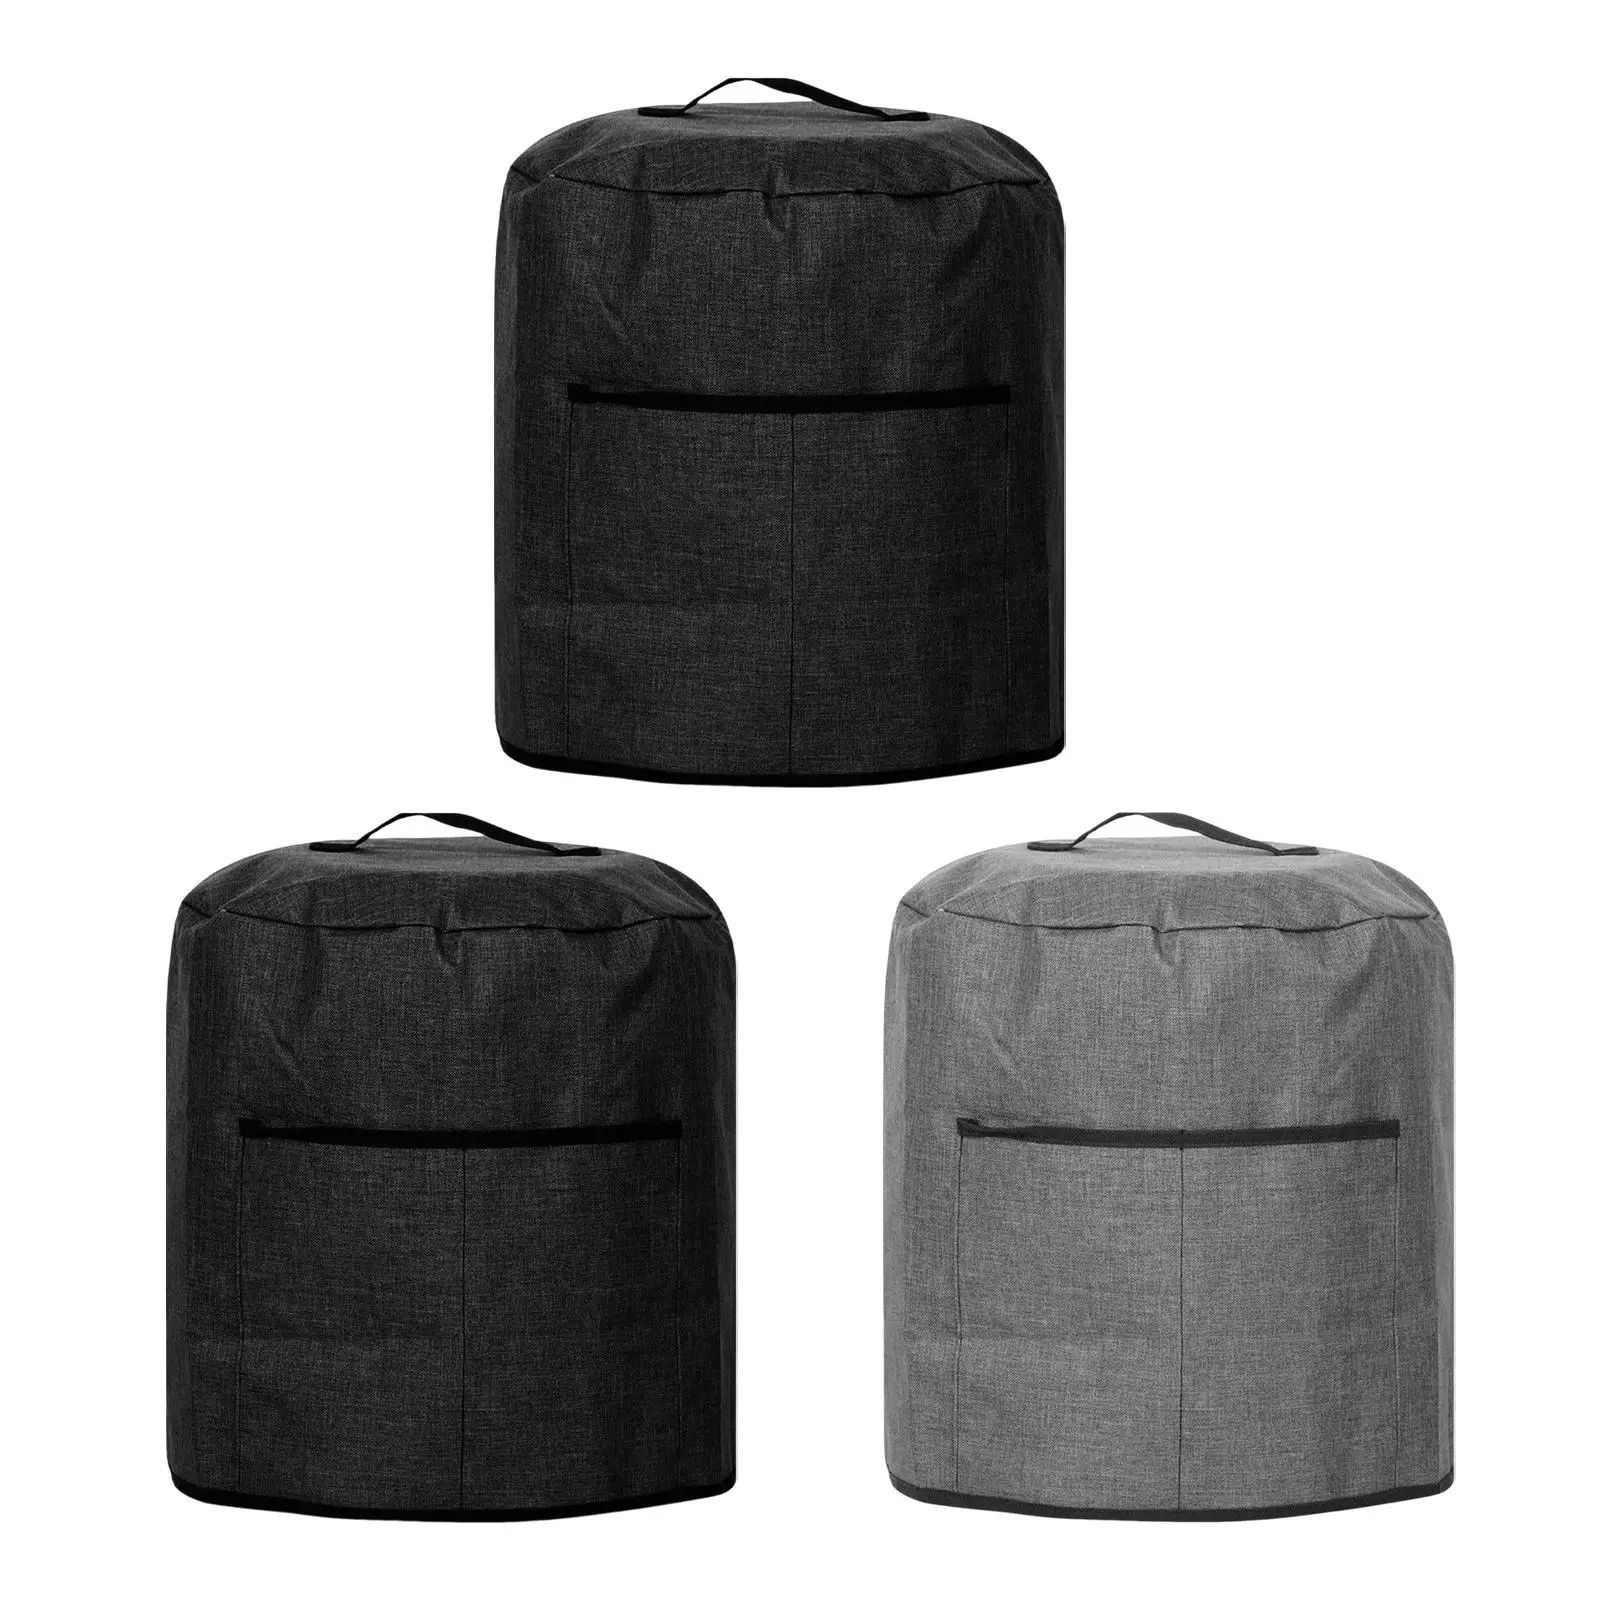 Air Fryer Dust Cover Lightweight Thick Camping Dustproof Reusable Multifunction Storage Cover for Cooker Air Fryer Oven Pot